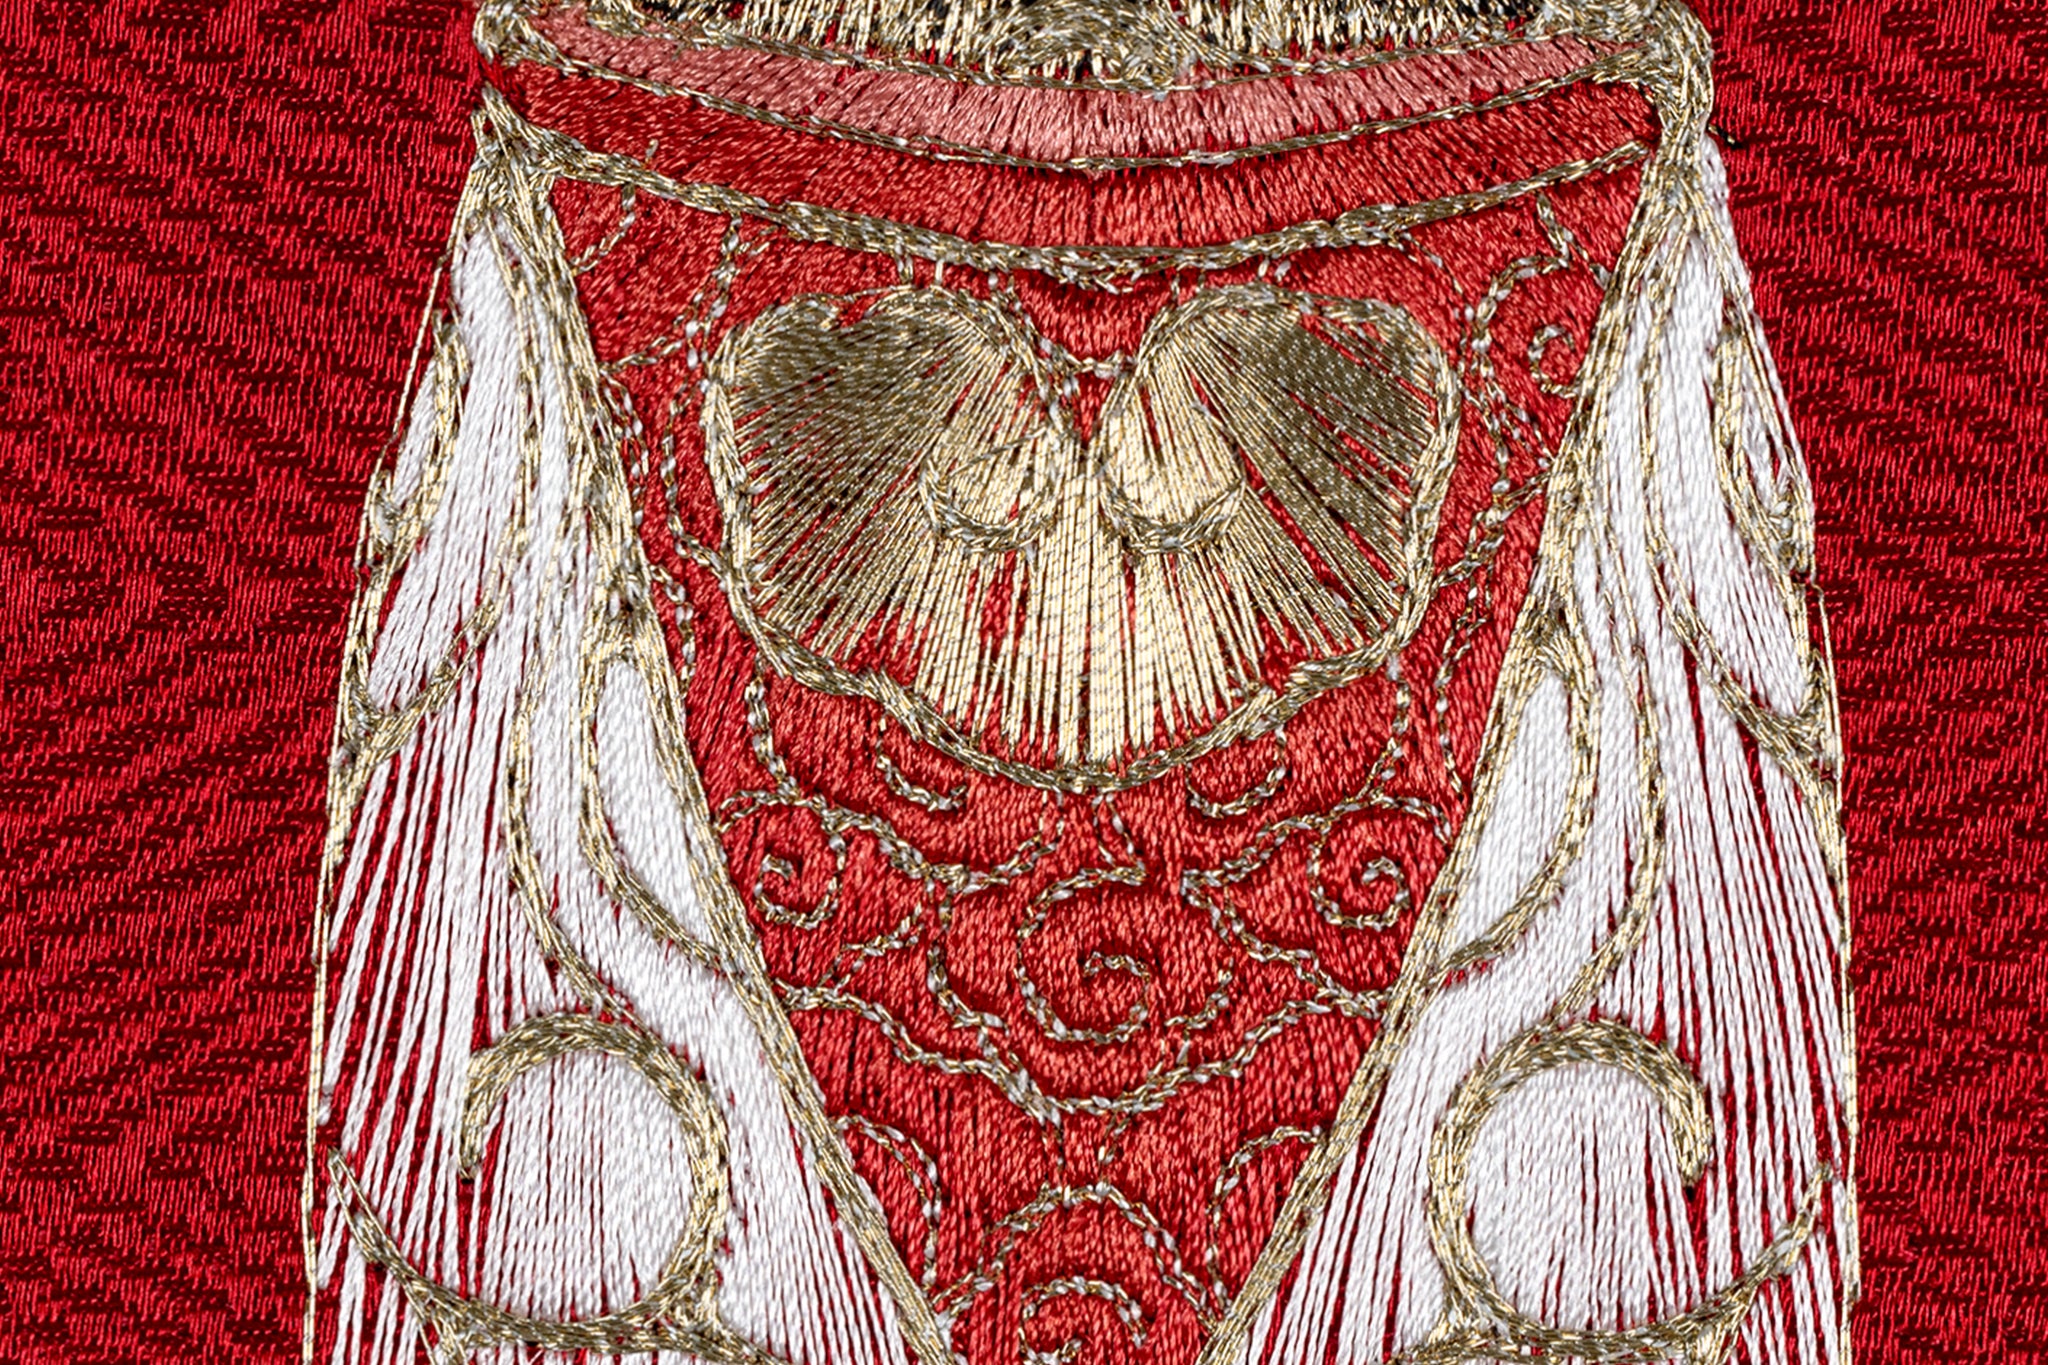 Main body detail on cicada embroidery work.